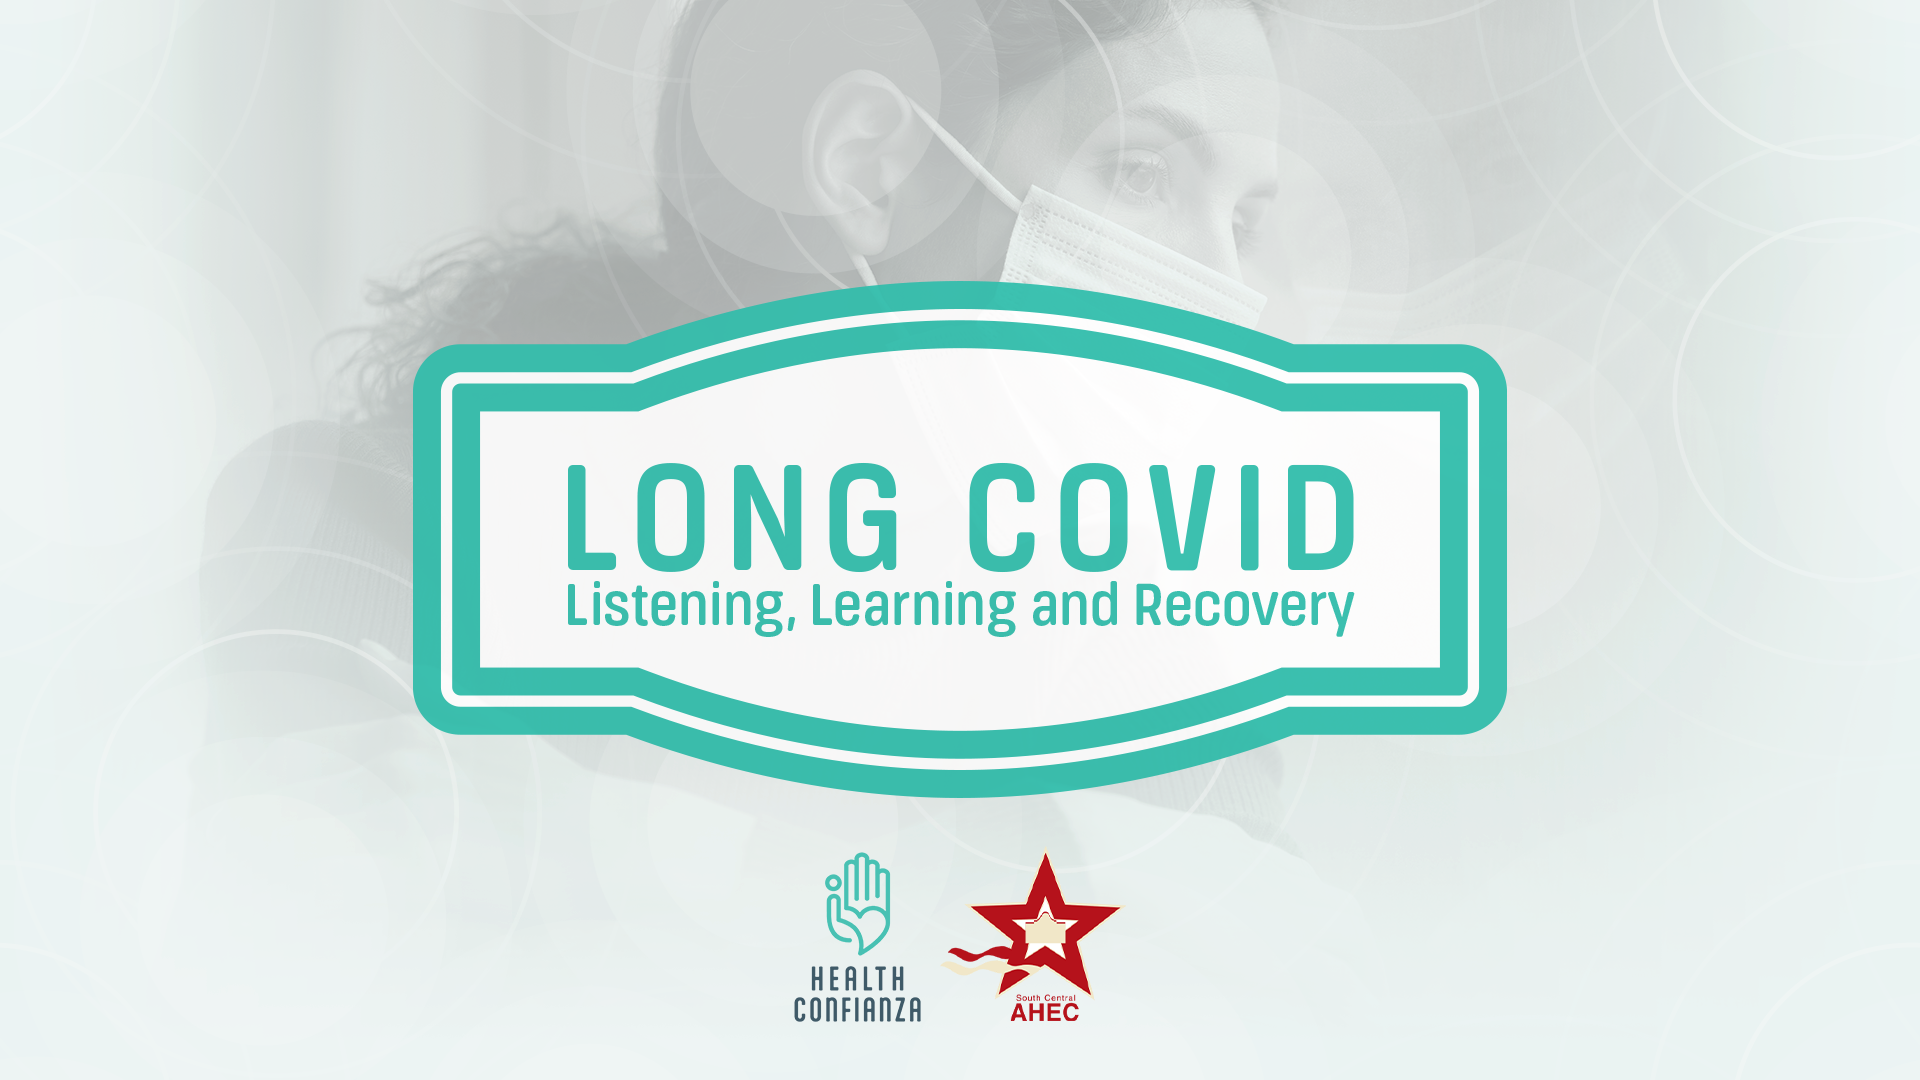 Long Covid -Listening, Learning and Recovery